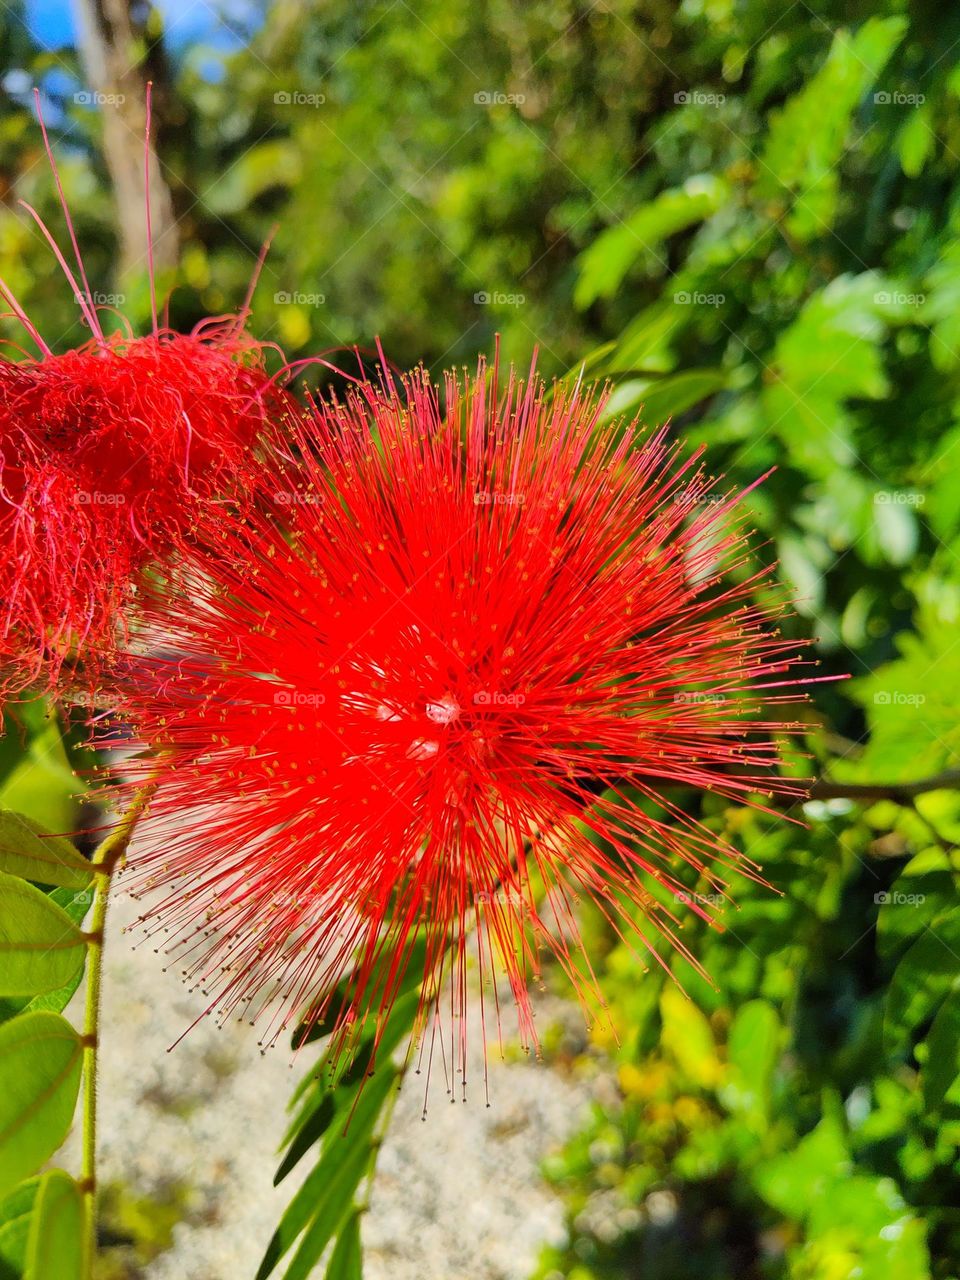 Bright scarlet red tropical flower splashed onto the green foliage bursts to life as a puffball to nourish hummingbirds and dragonflies